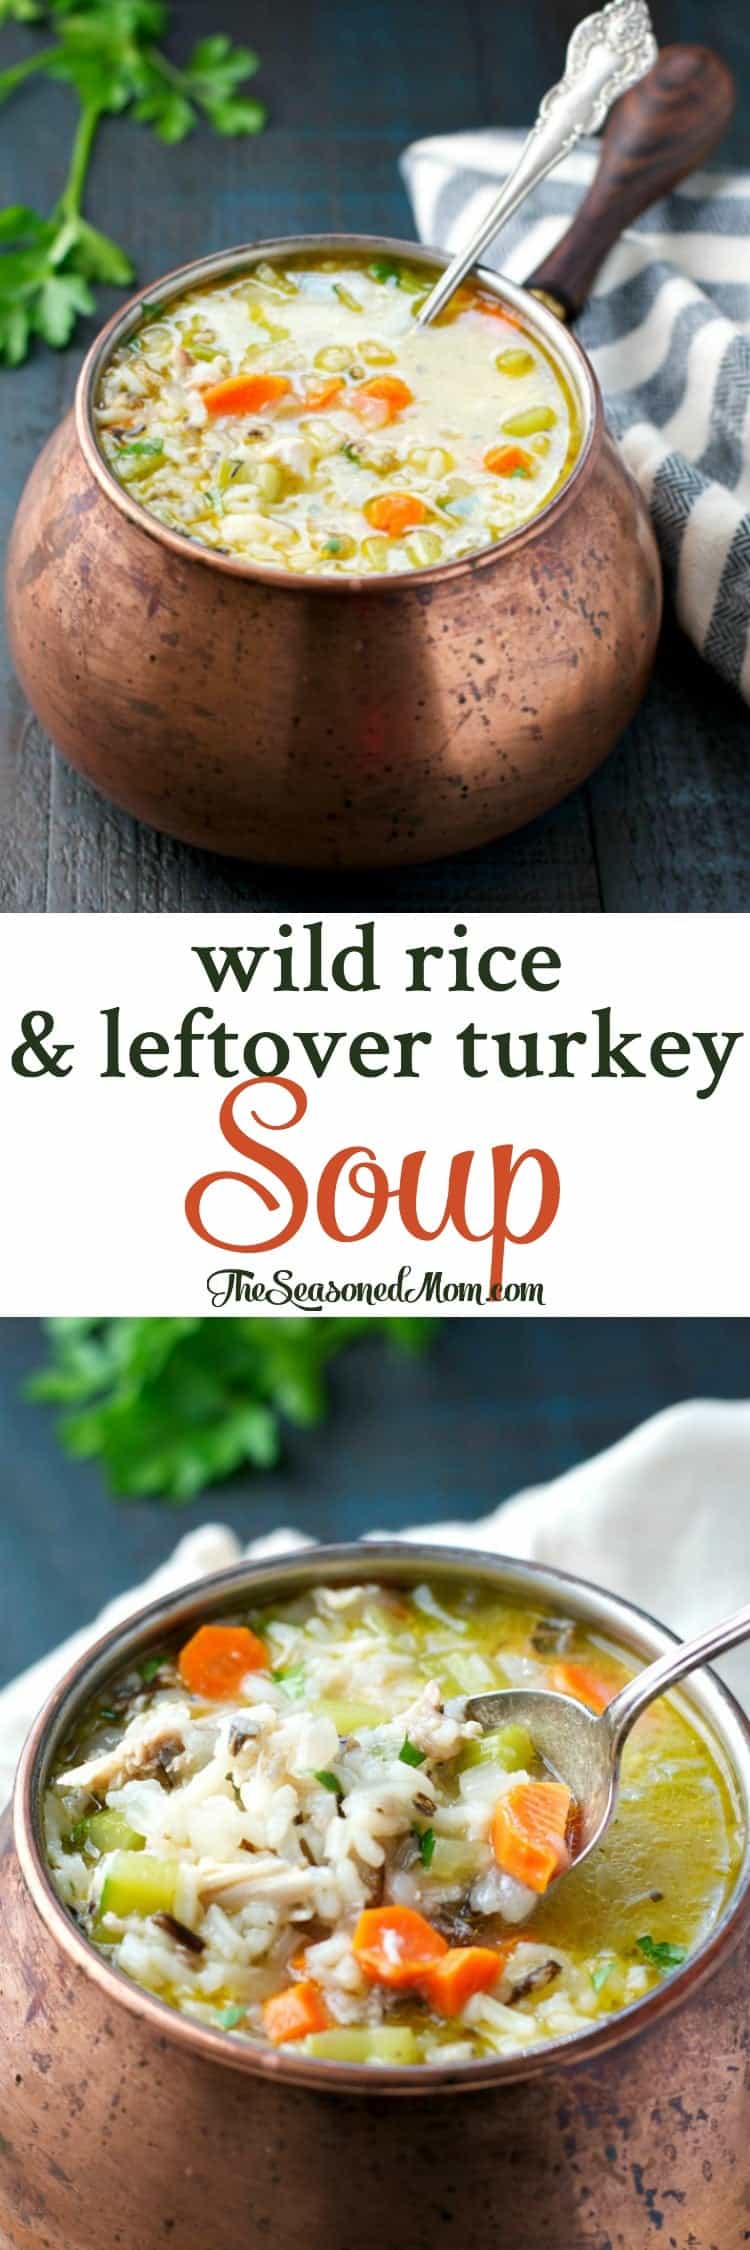 Wild Rice and Leftover Turkey Soup - The Seasoned Mom